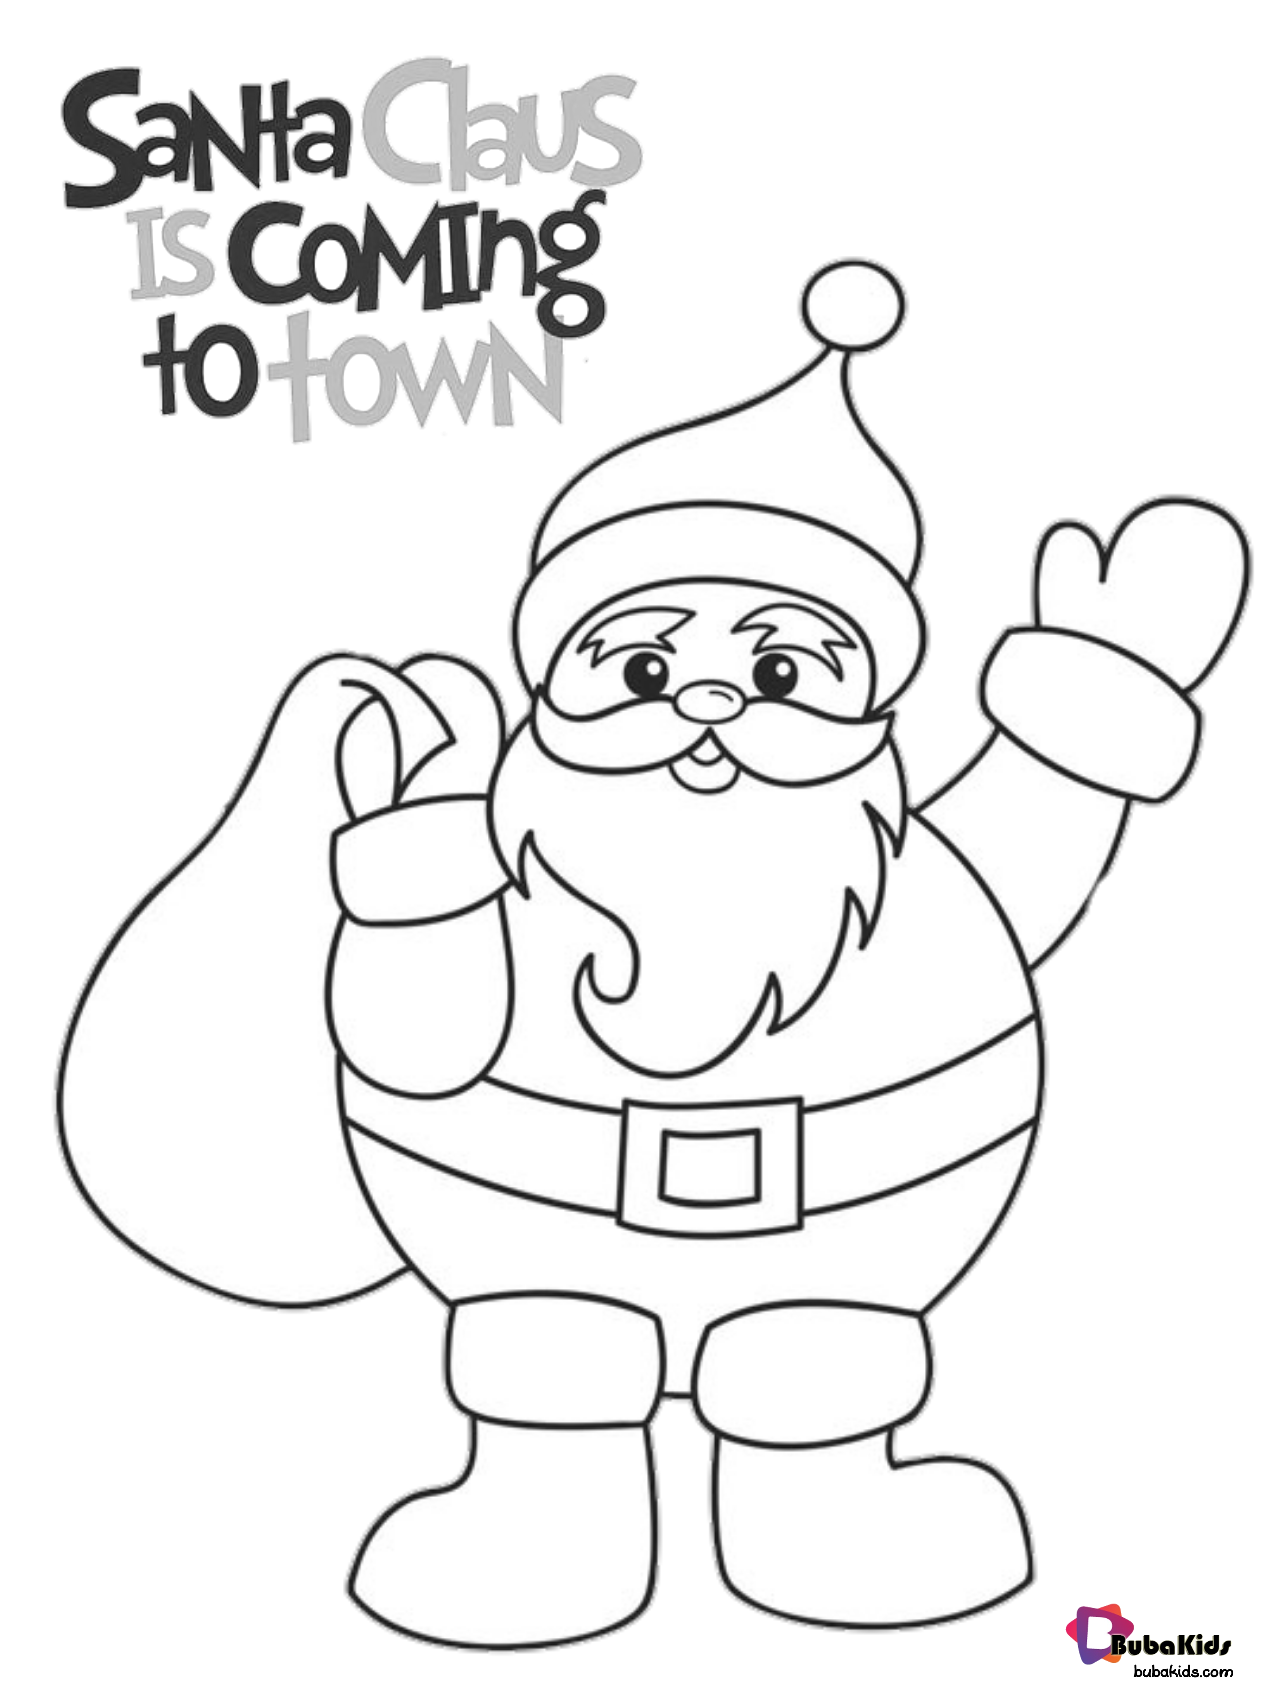 Santa Claus is coming to town christmas coloring page.